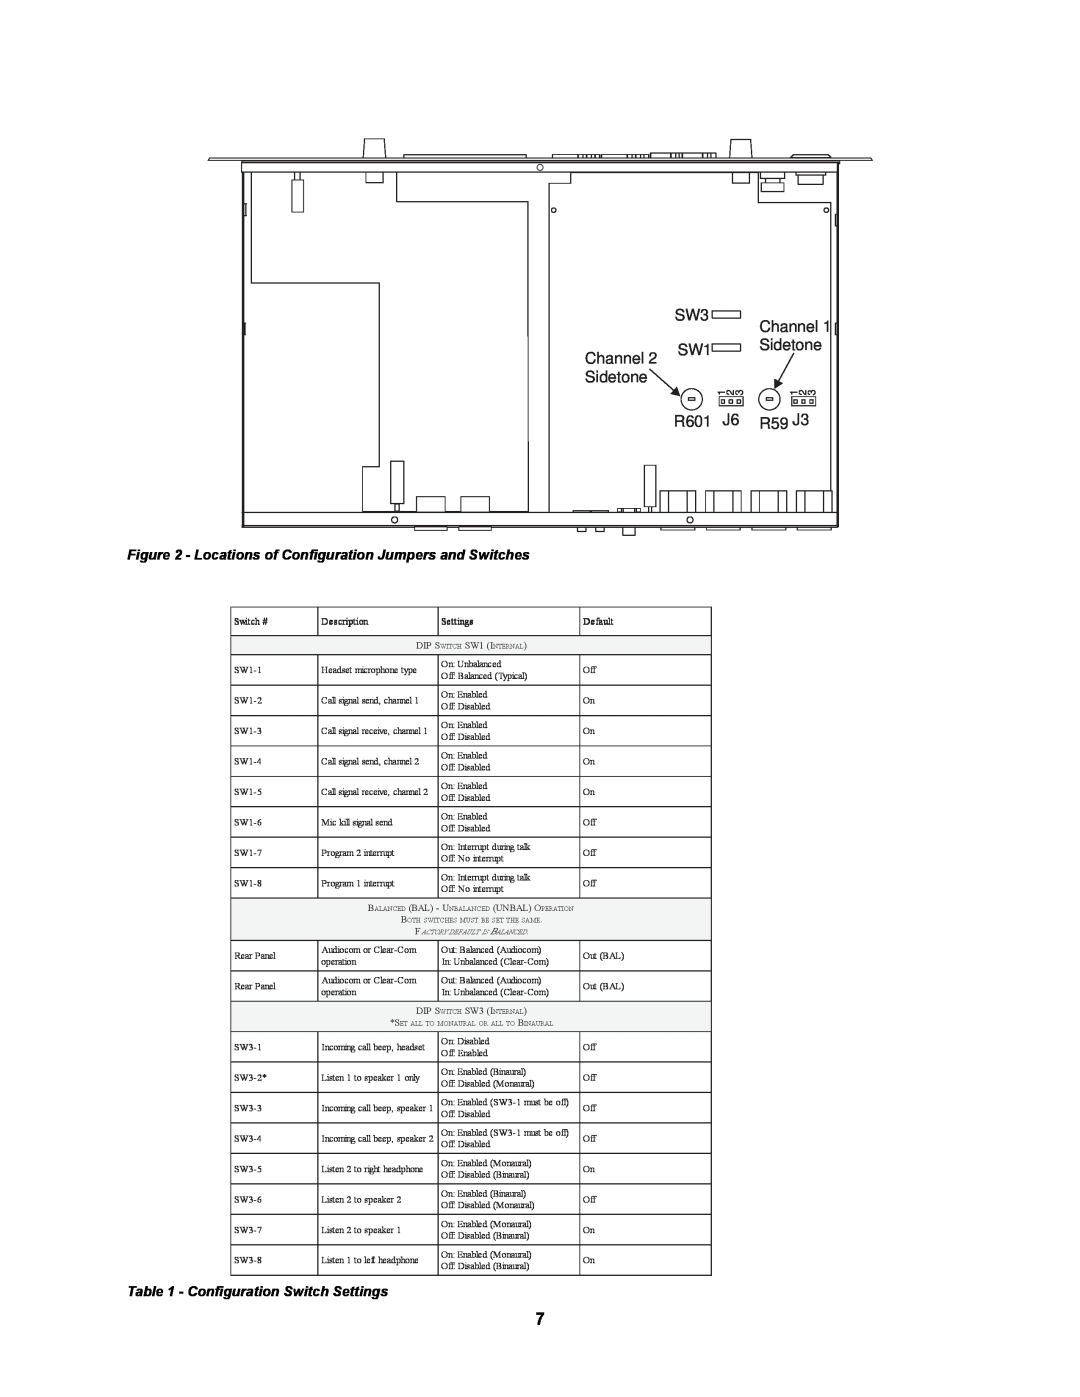 Telex MS2002 manual Locations of Configuration Jumpers and Switches, Configuration Switch Settings, Switch #, Description 